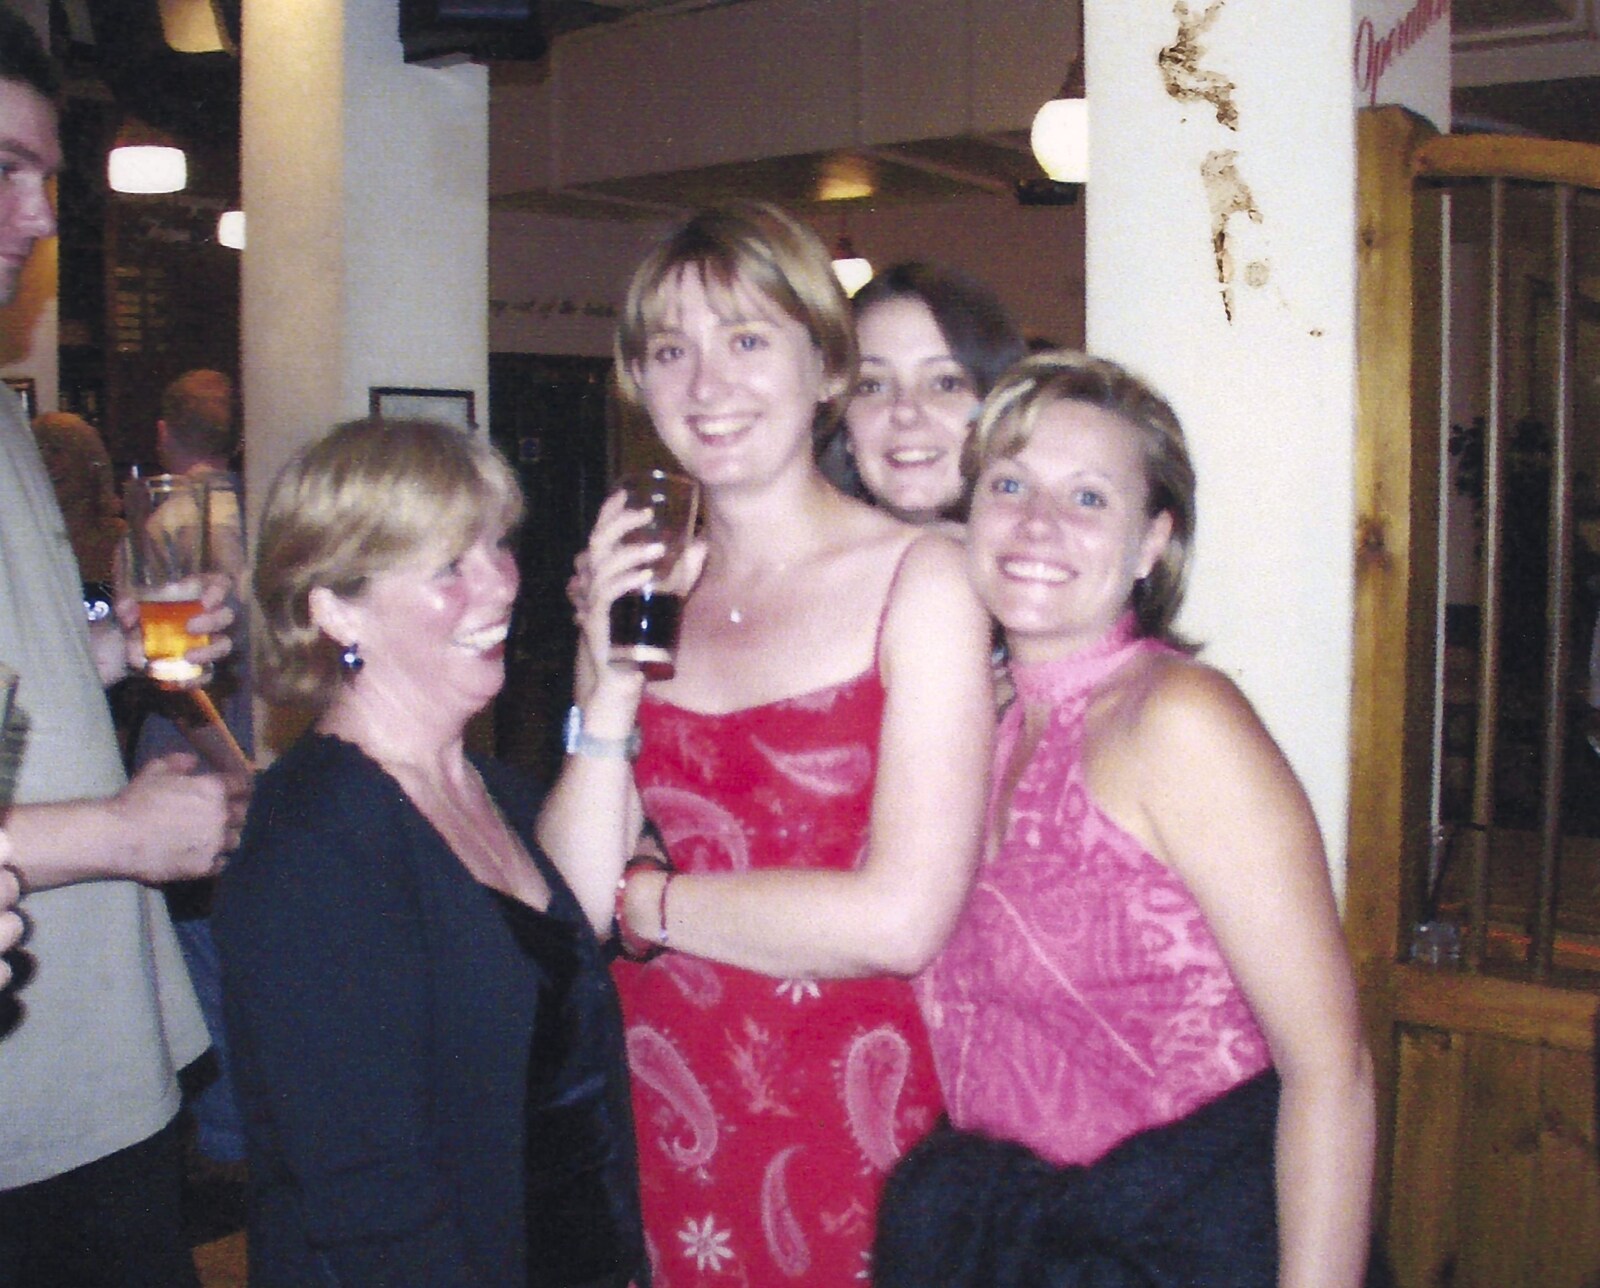 Hamish gets a photo of some random girls from Sean's Stag Do, Bournemouth, Dorset - 5th August 2000